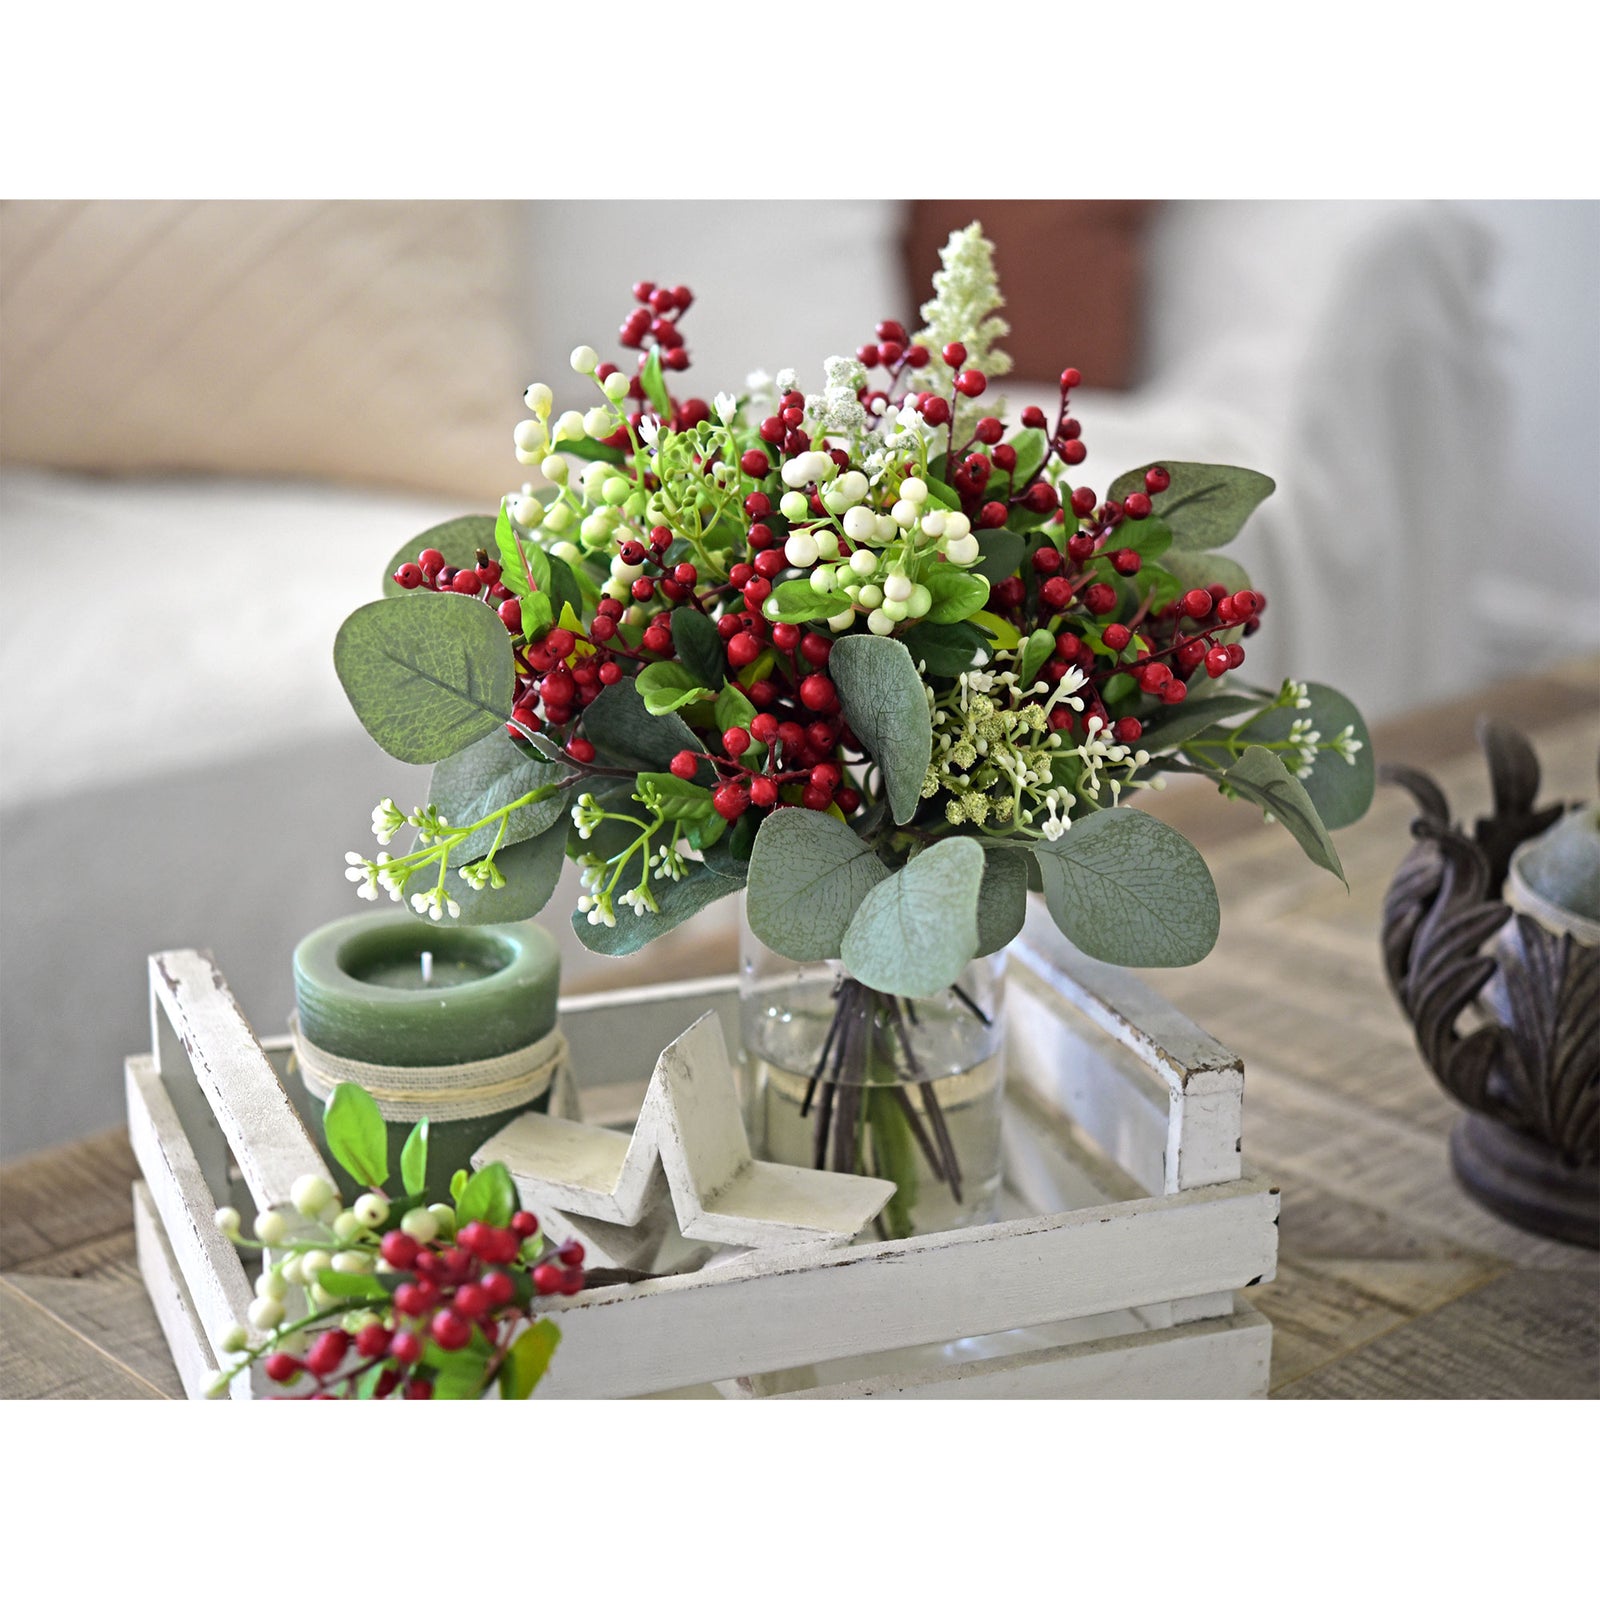 Festive Joyful Artificial Holly Red Berry Stems for the Holidays